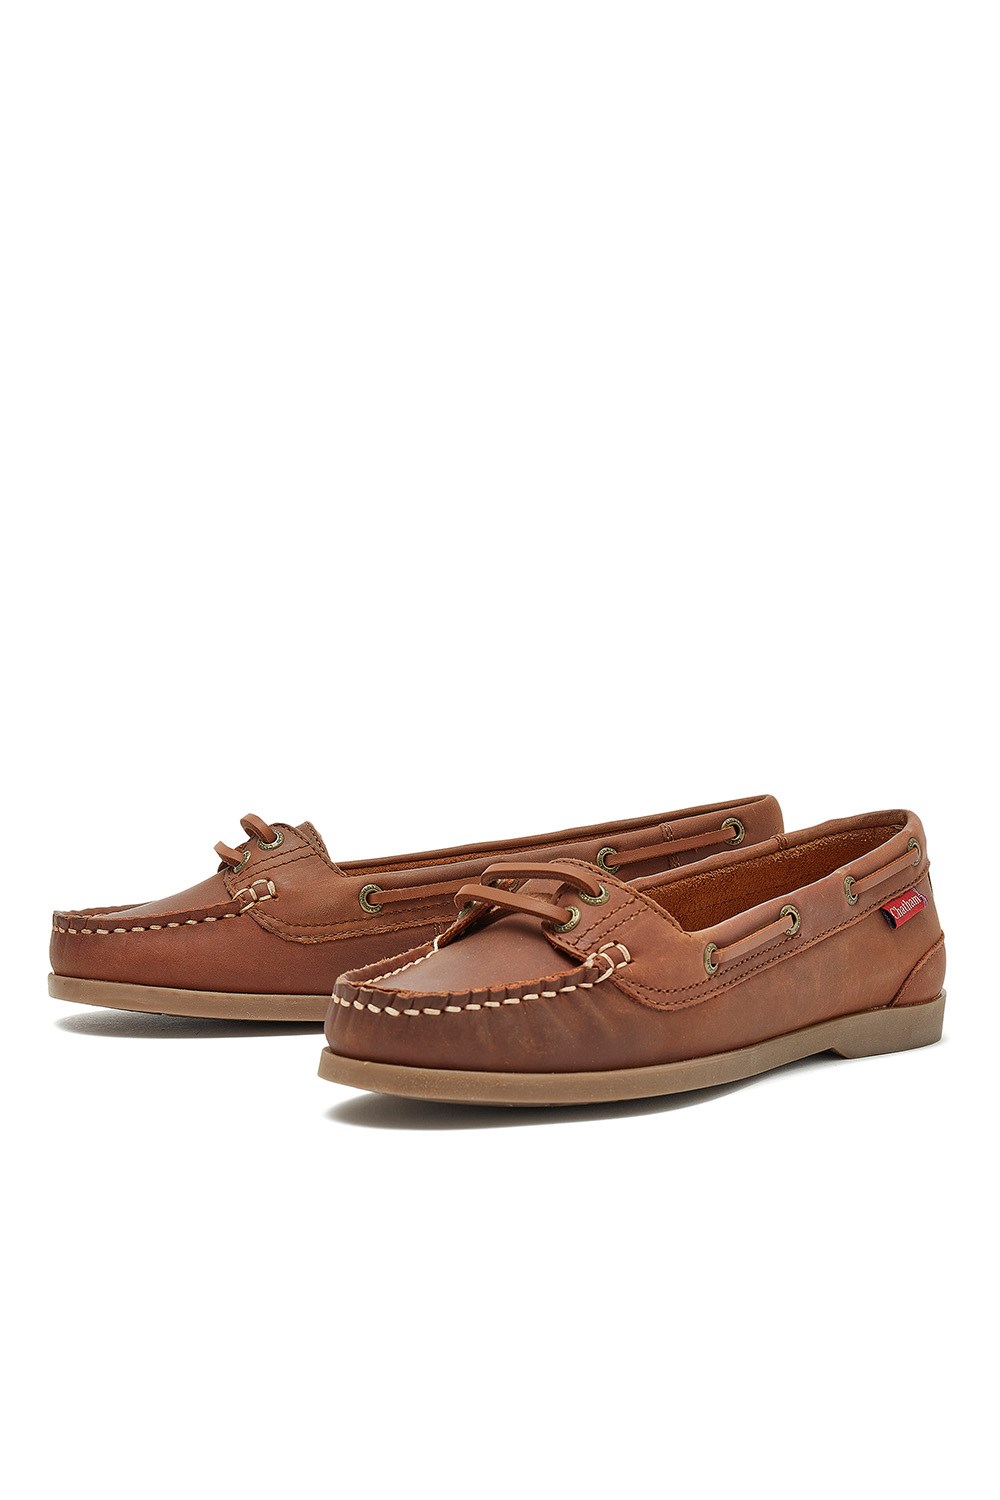 Harper Womens Premium Leather Boat Shoes -